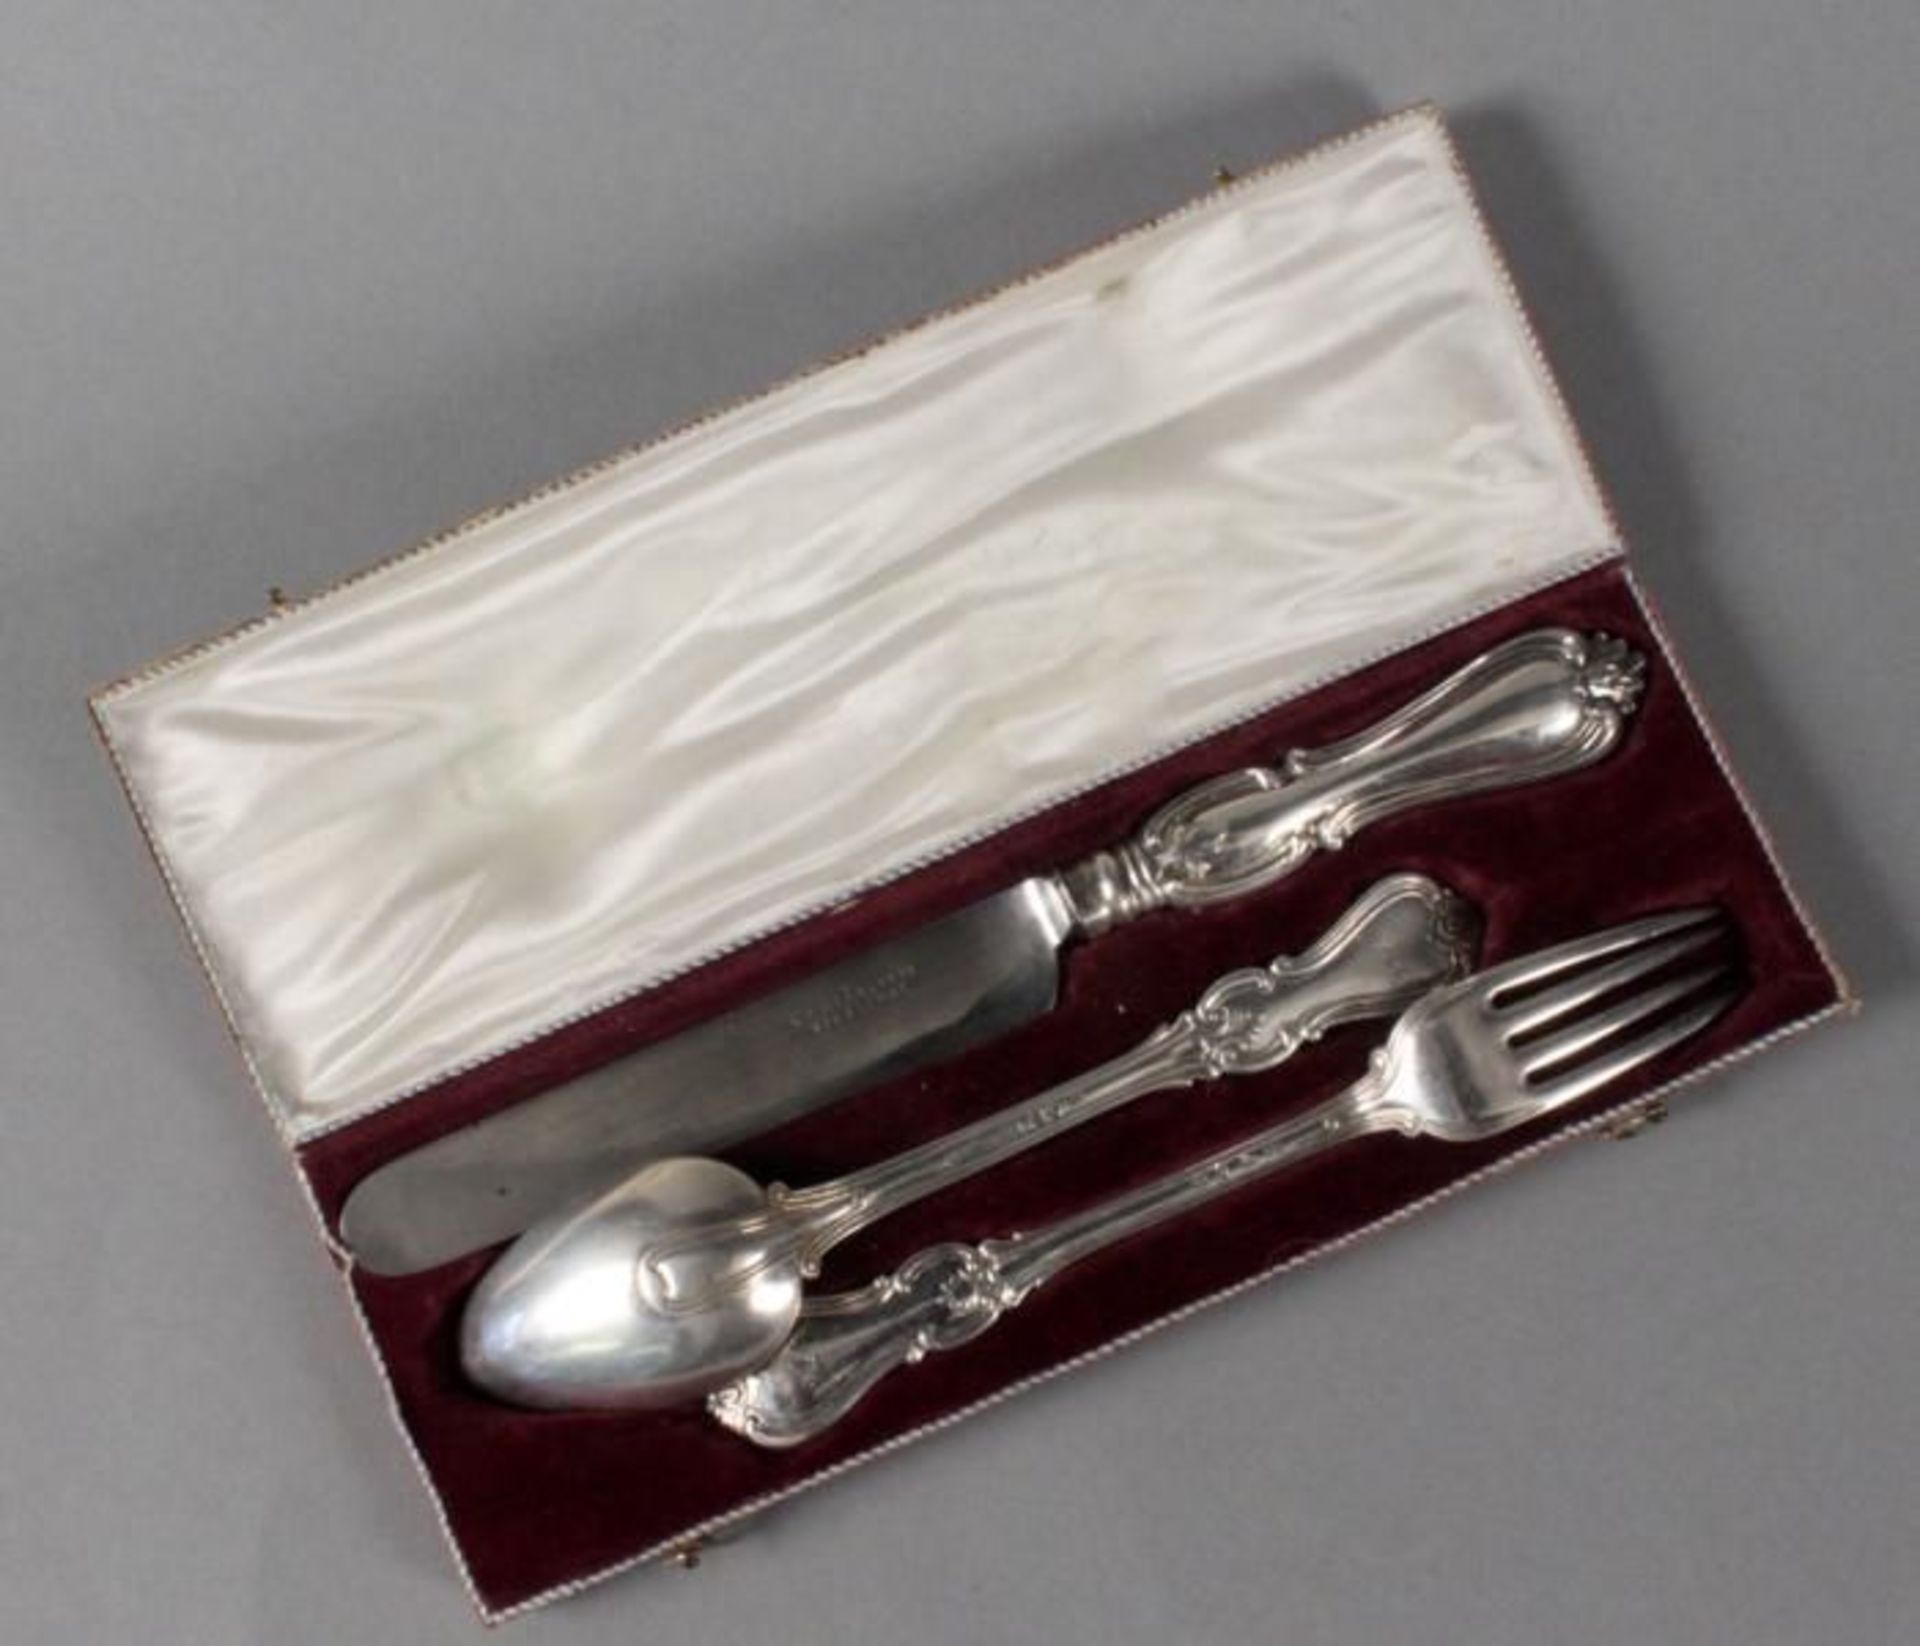 A CHILD'S CUTLERY SET IN A CASE Sweden, 19th century Silver, 3-piece, Baroque style, consisting of